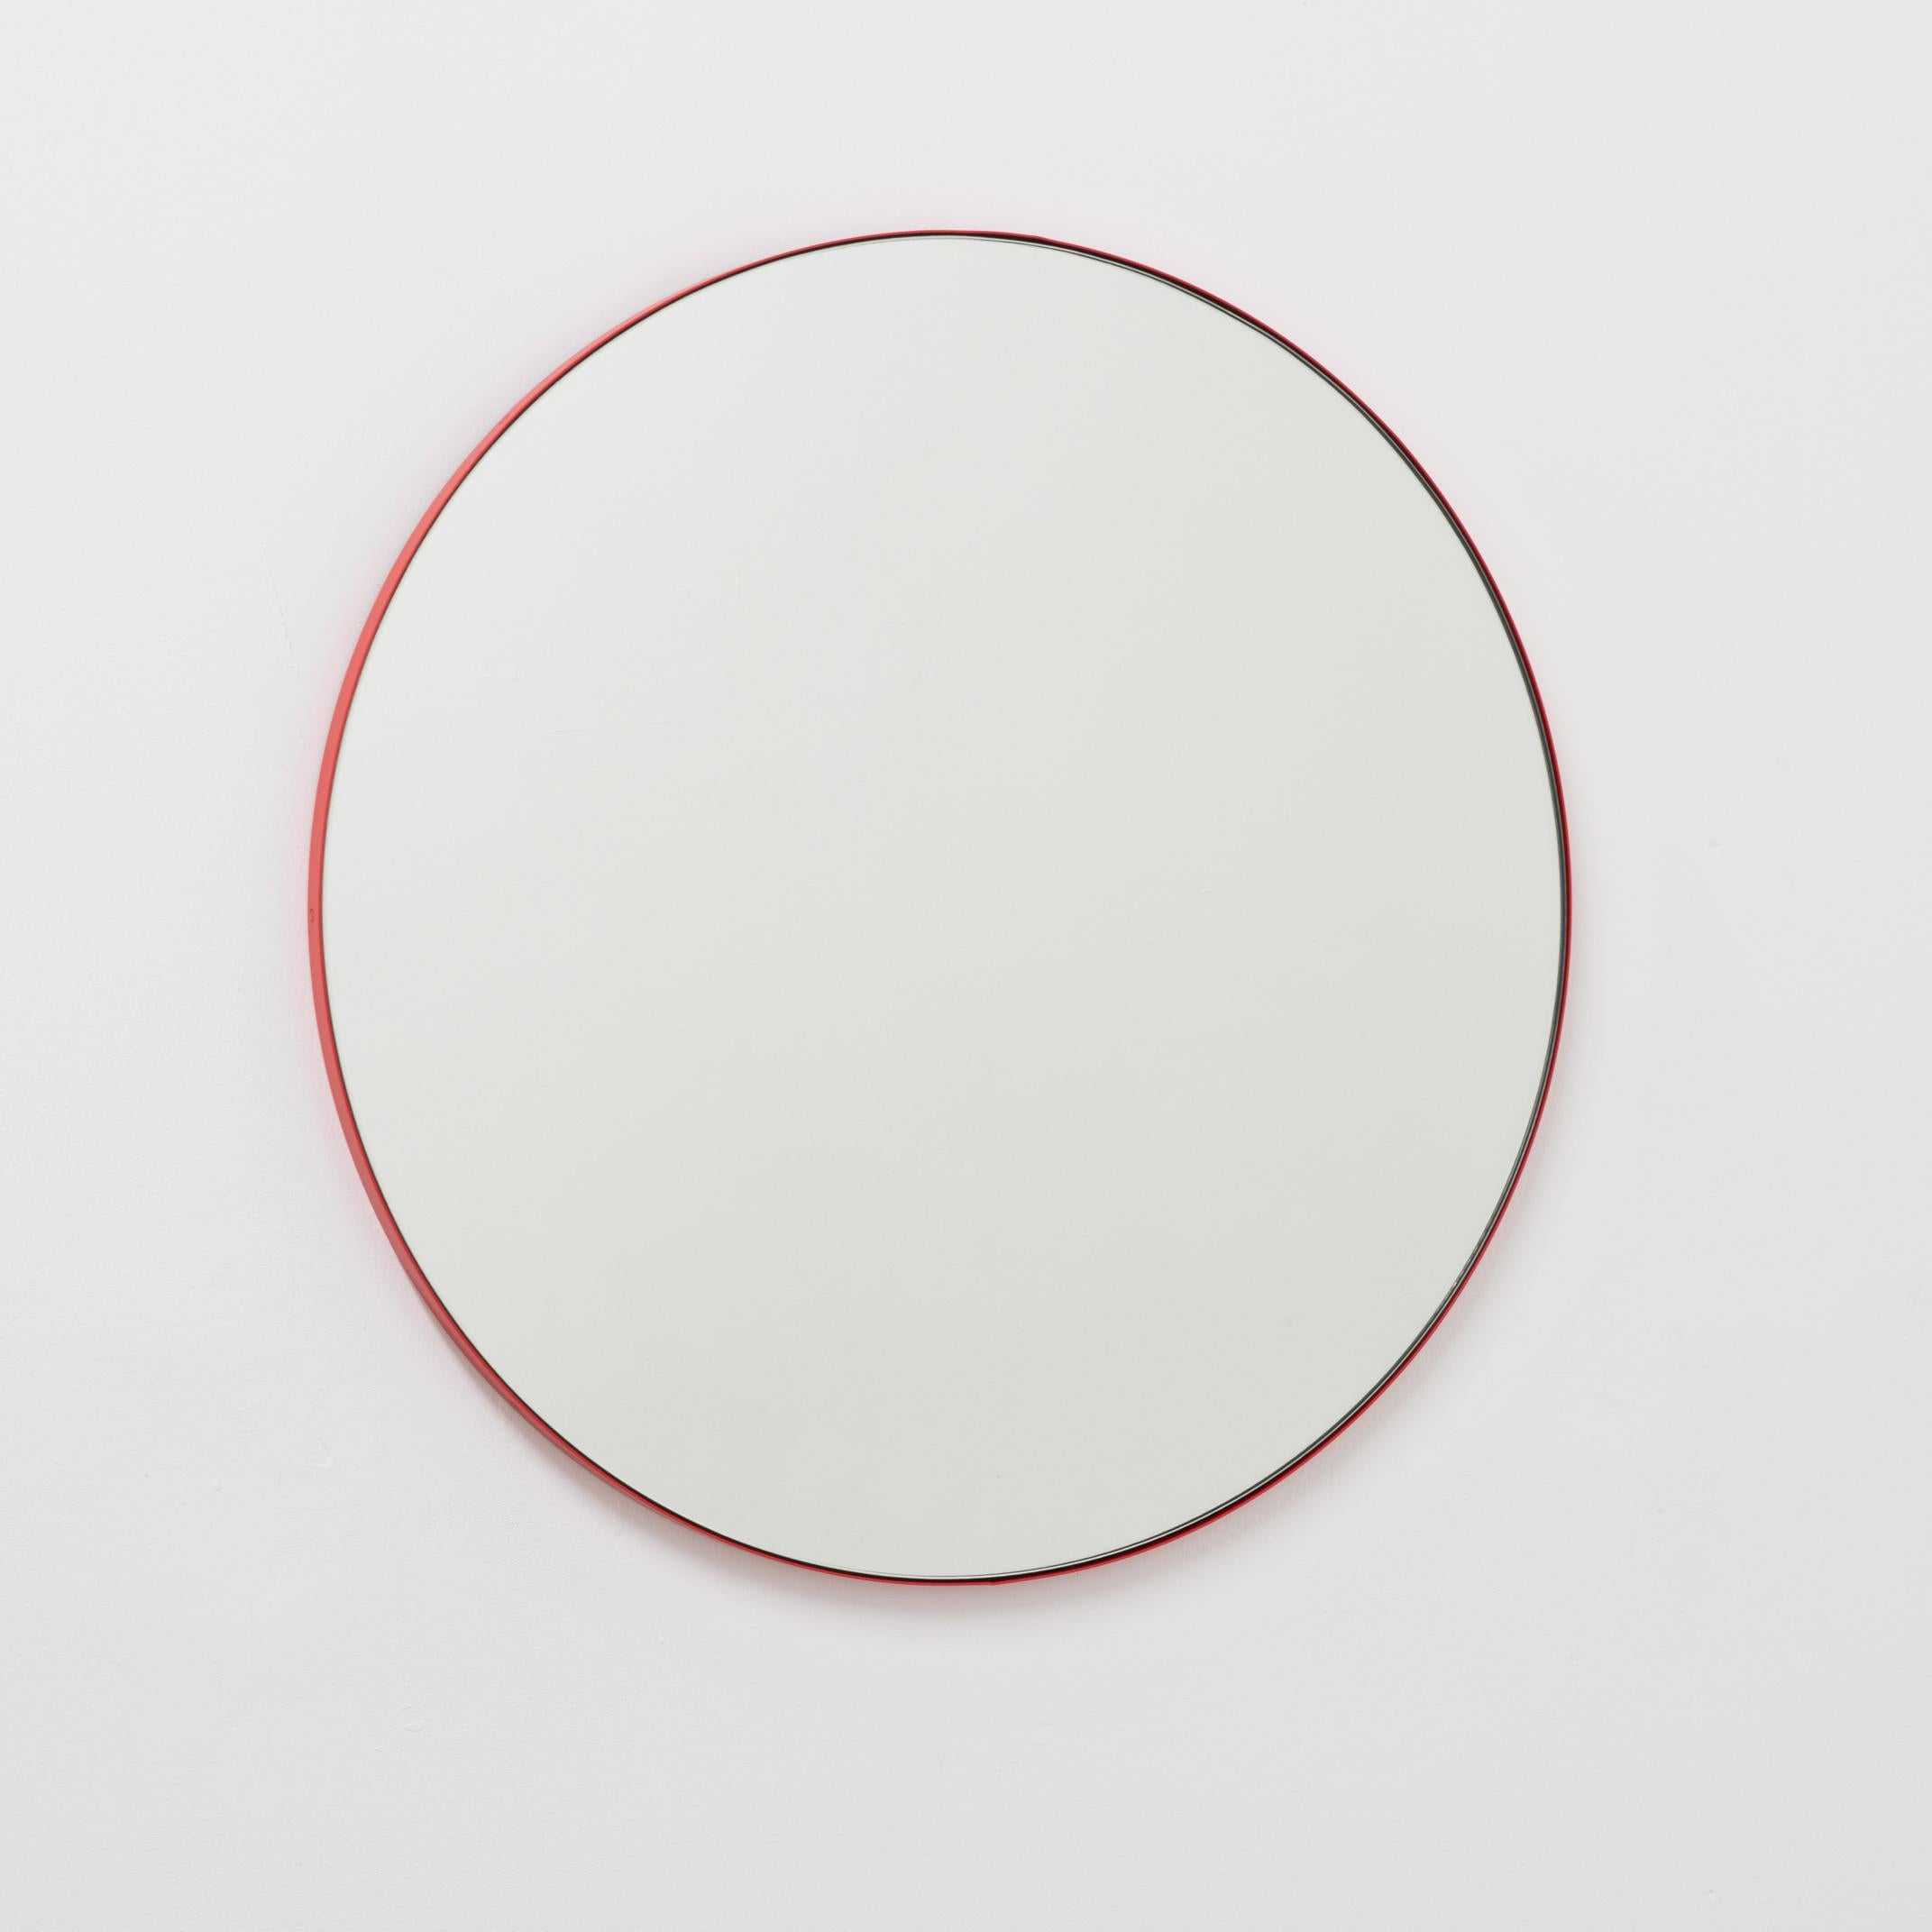 Aluminum Orbis Round Contemporary Handcrafted Mirror with Red Frame, Large For Sale